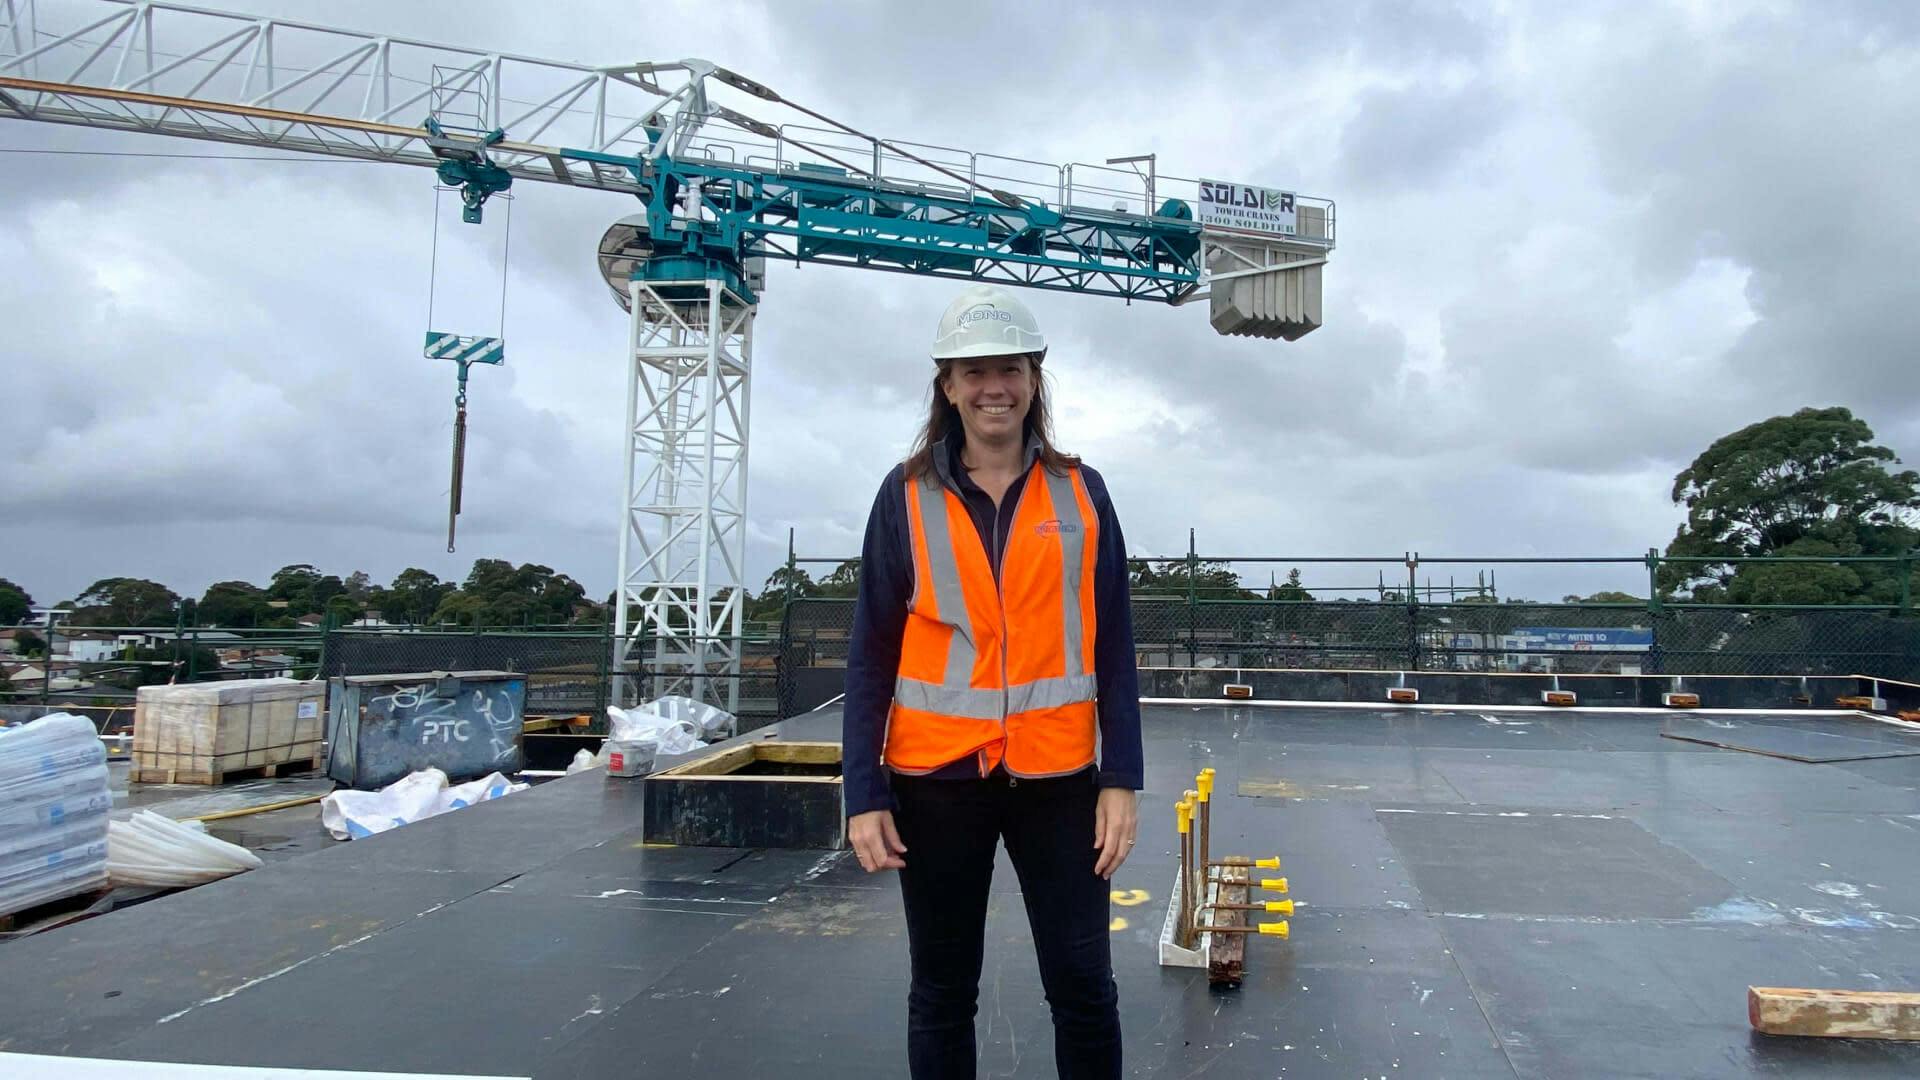 Michelle Stack standing on a site in front of a crane